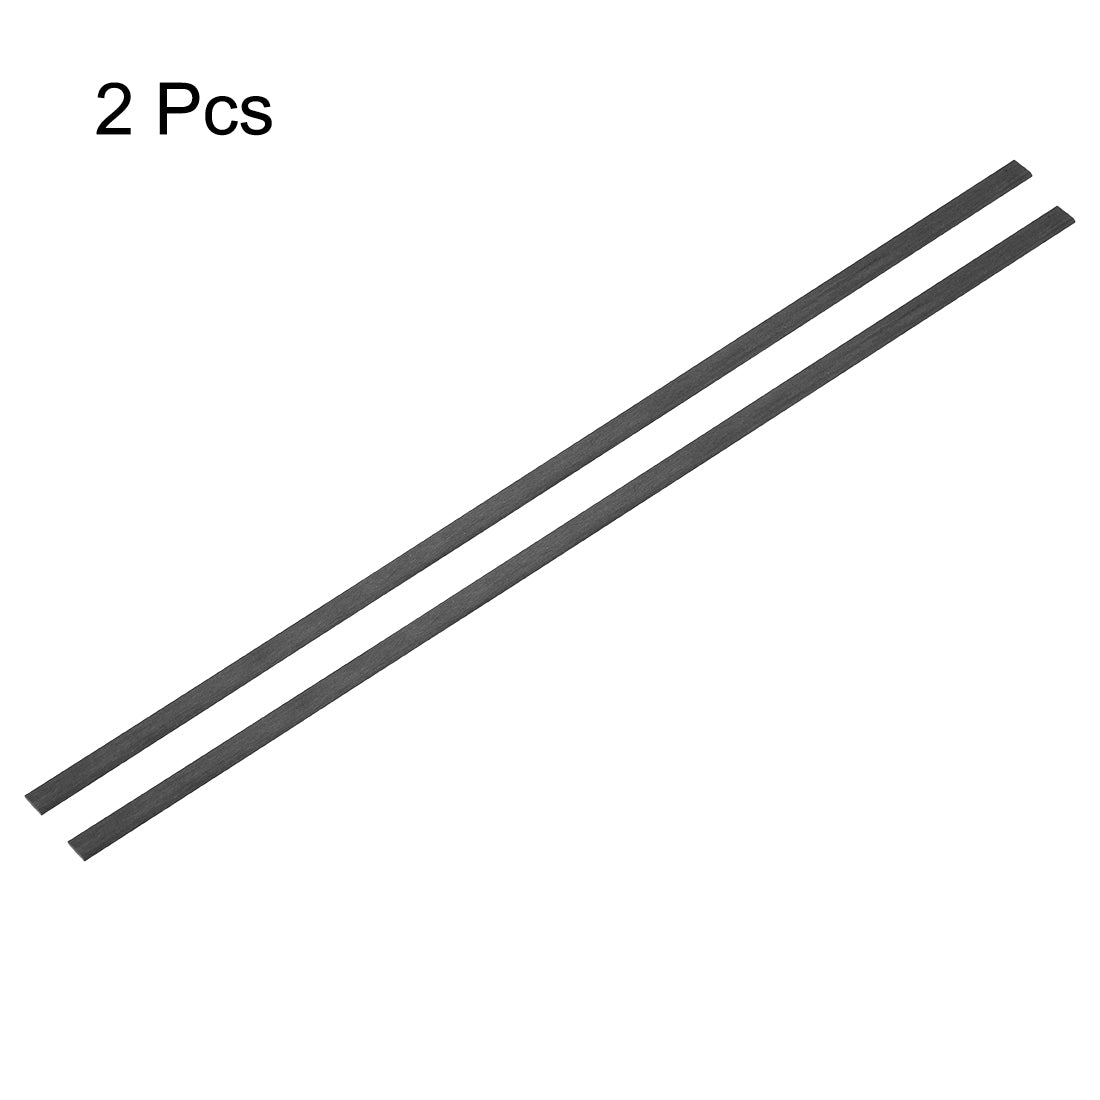 uxcell Uxcell Carbon Fiber Strip Bars 1x5mm 600mm Length Pultruded Carbon Fiber Strips for Kites, RC Airplane 2 Pcs